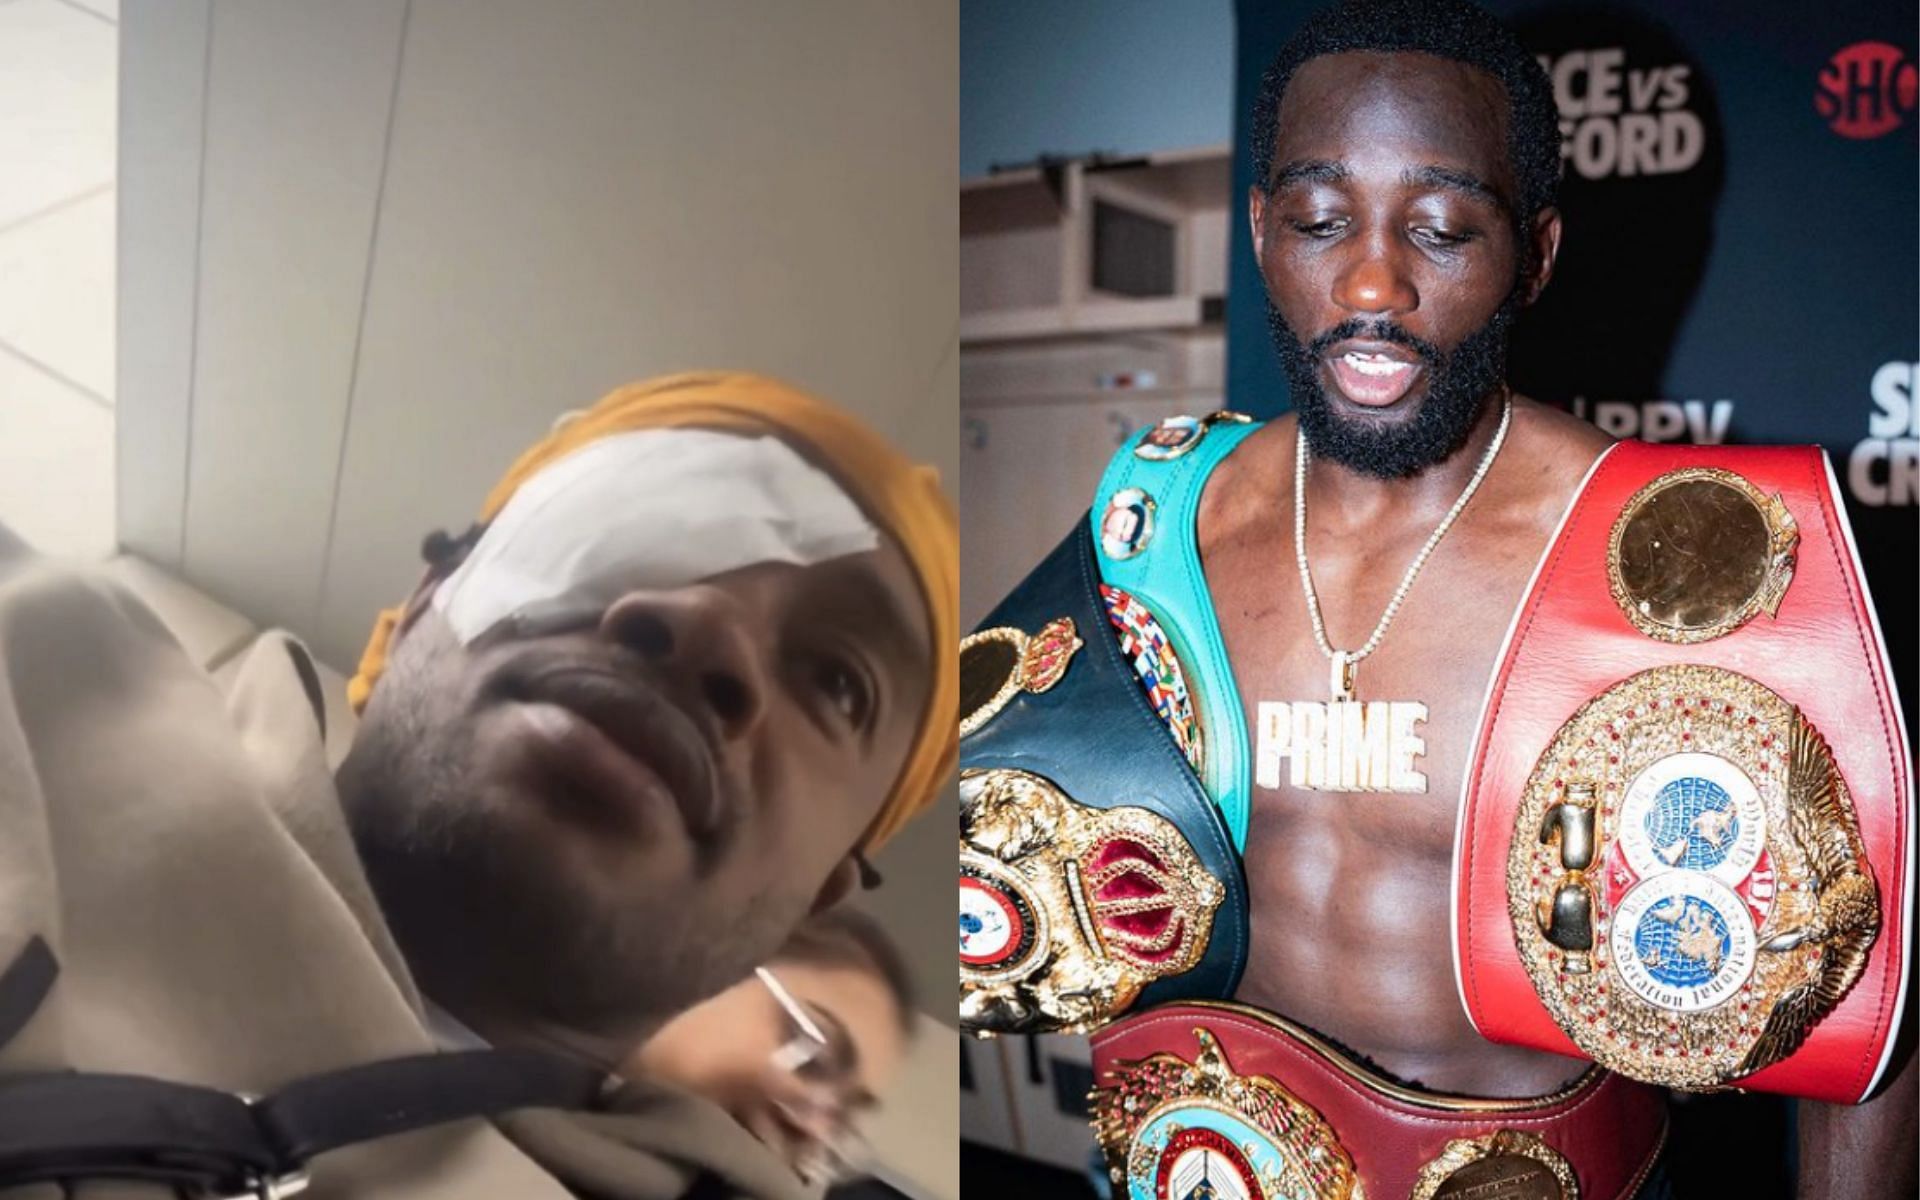 Terence Crawford (right) speaks out after Errol Spence Jr. (left) claims he fought 